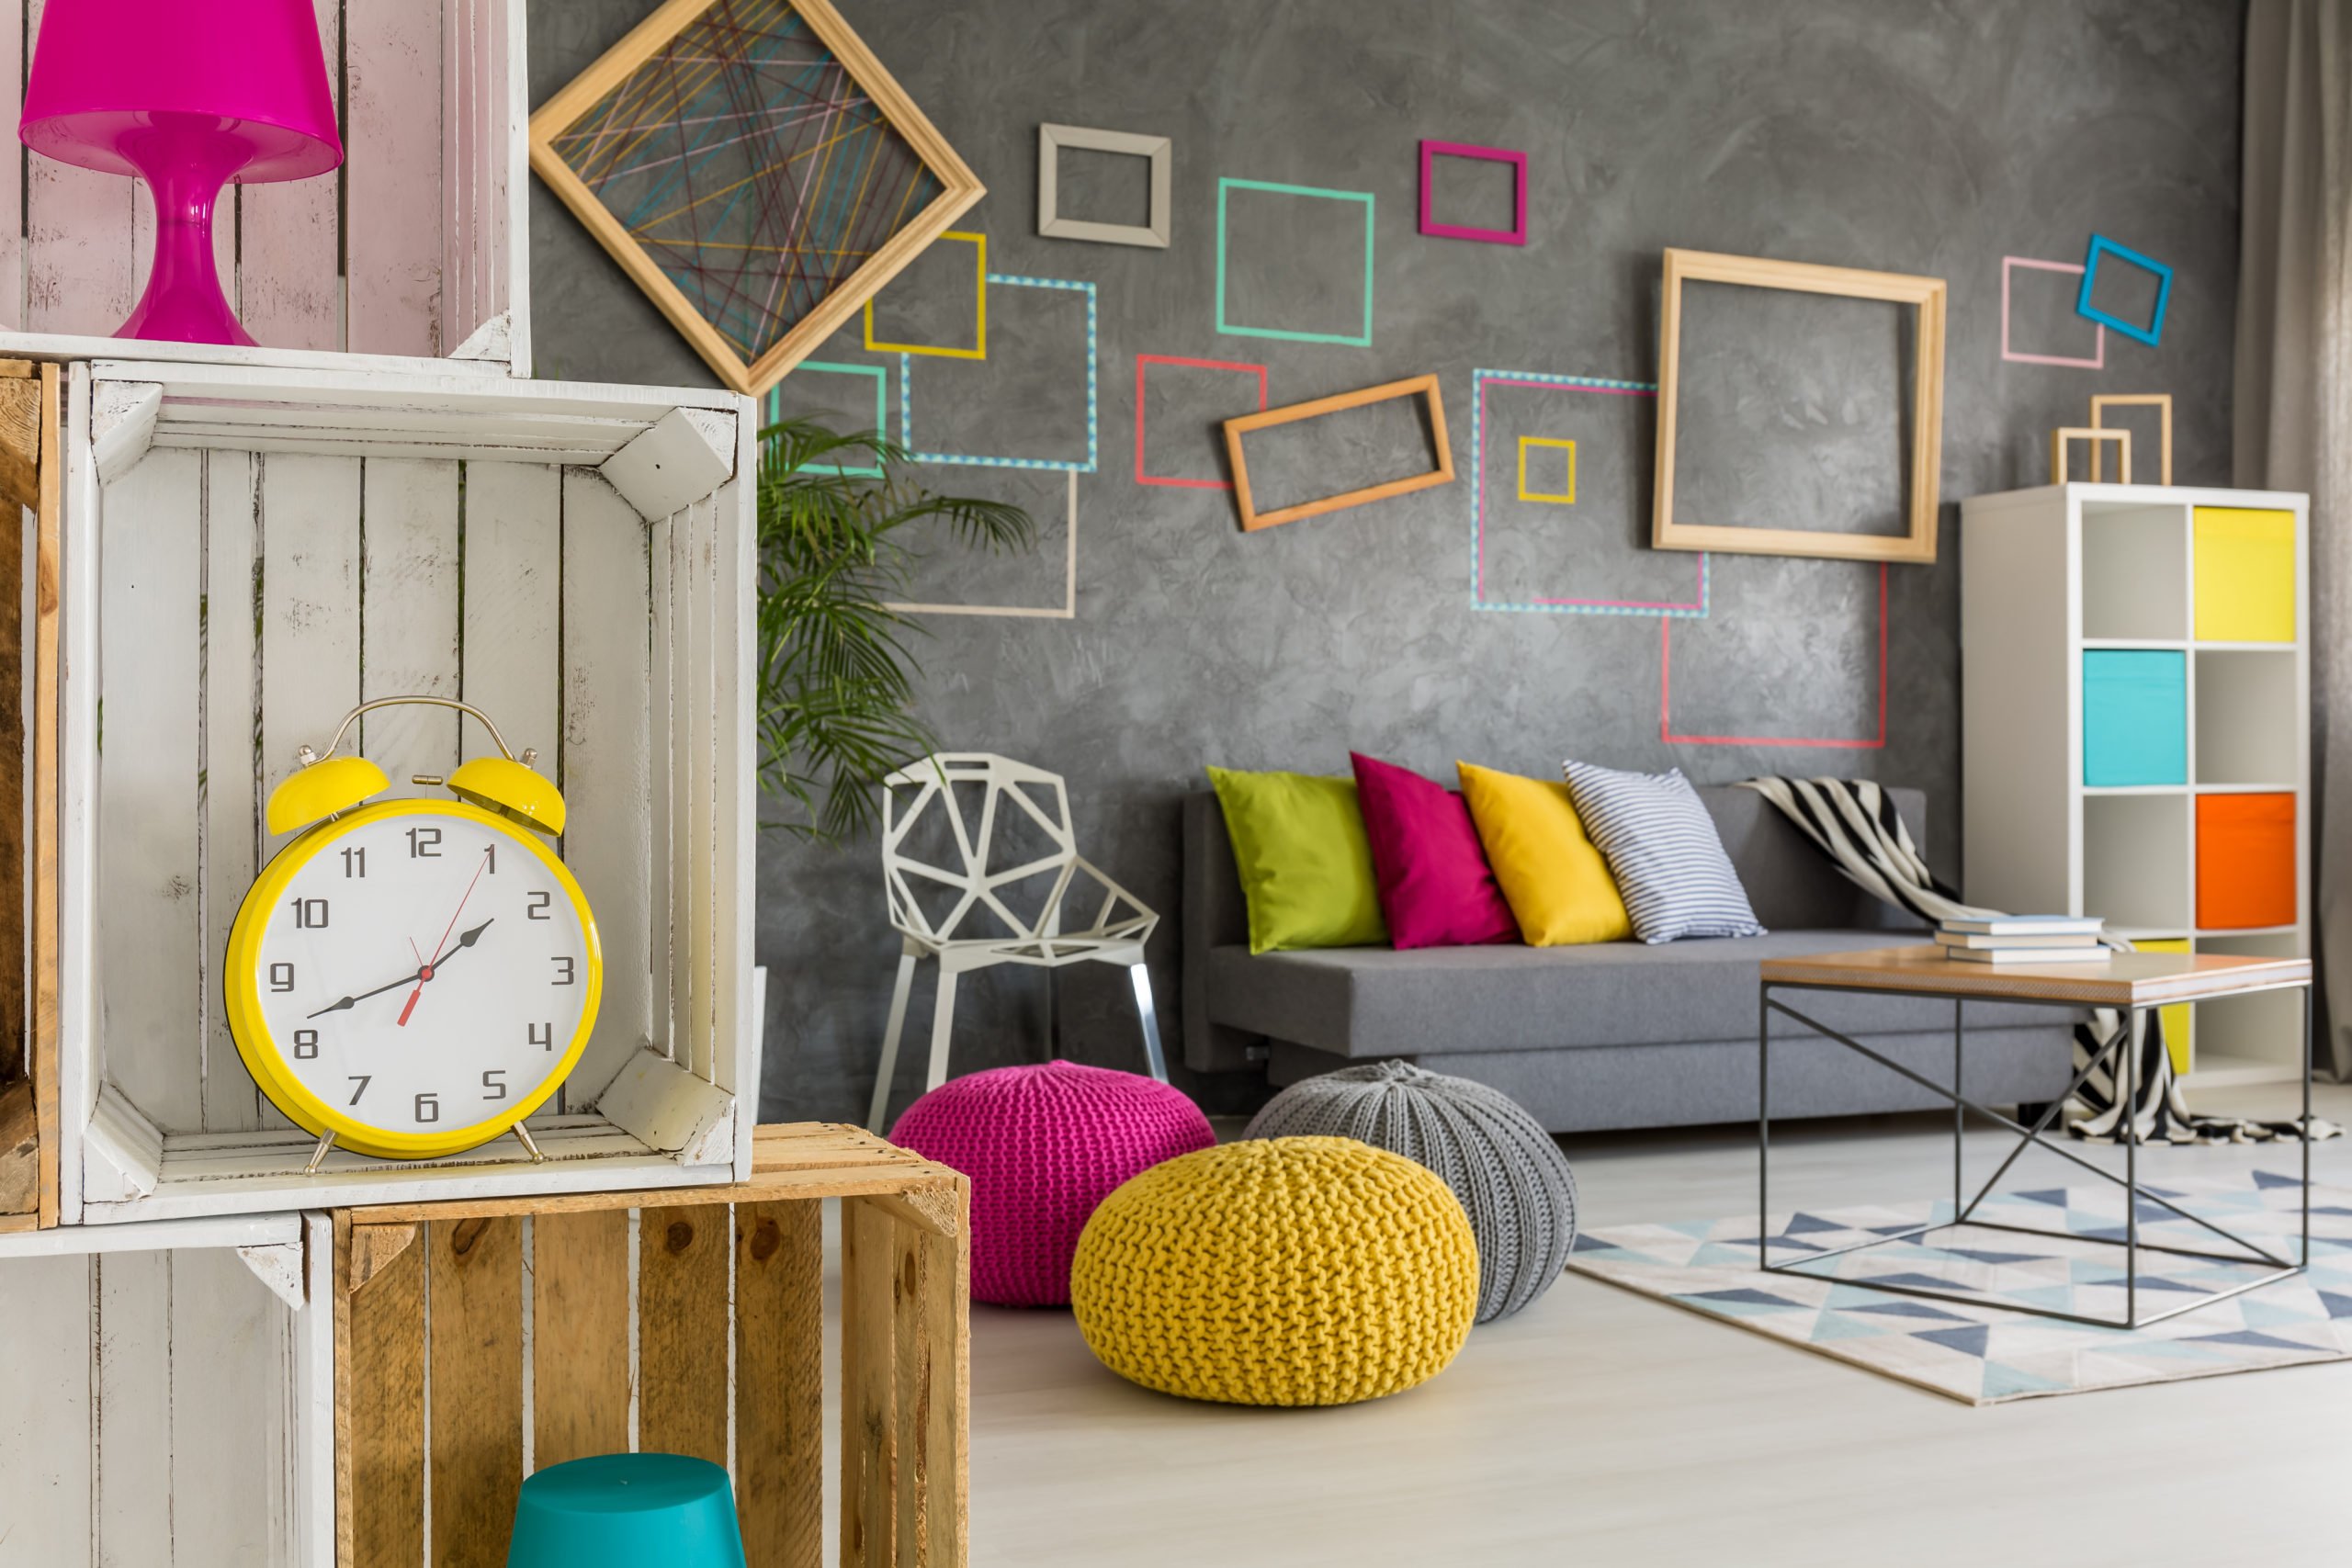 7 Non-Permanent Ways To Decorate Student Housing